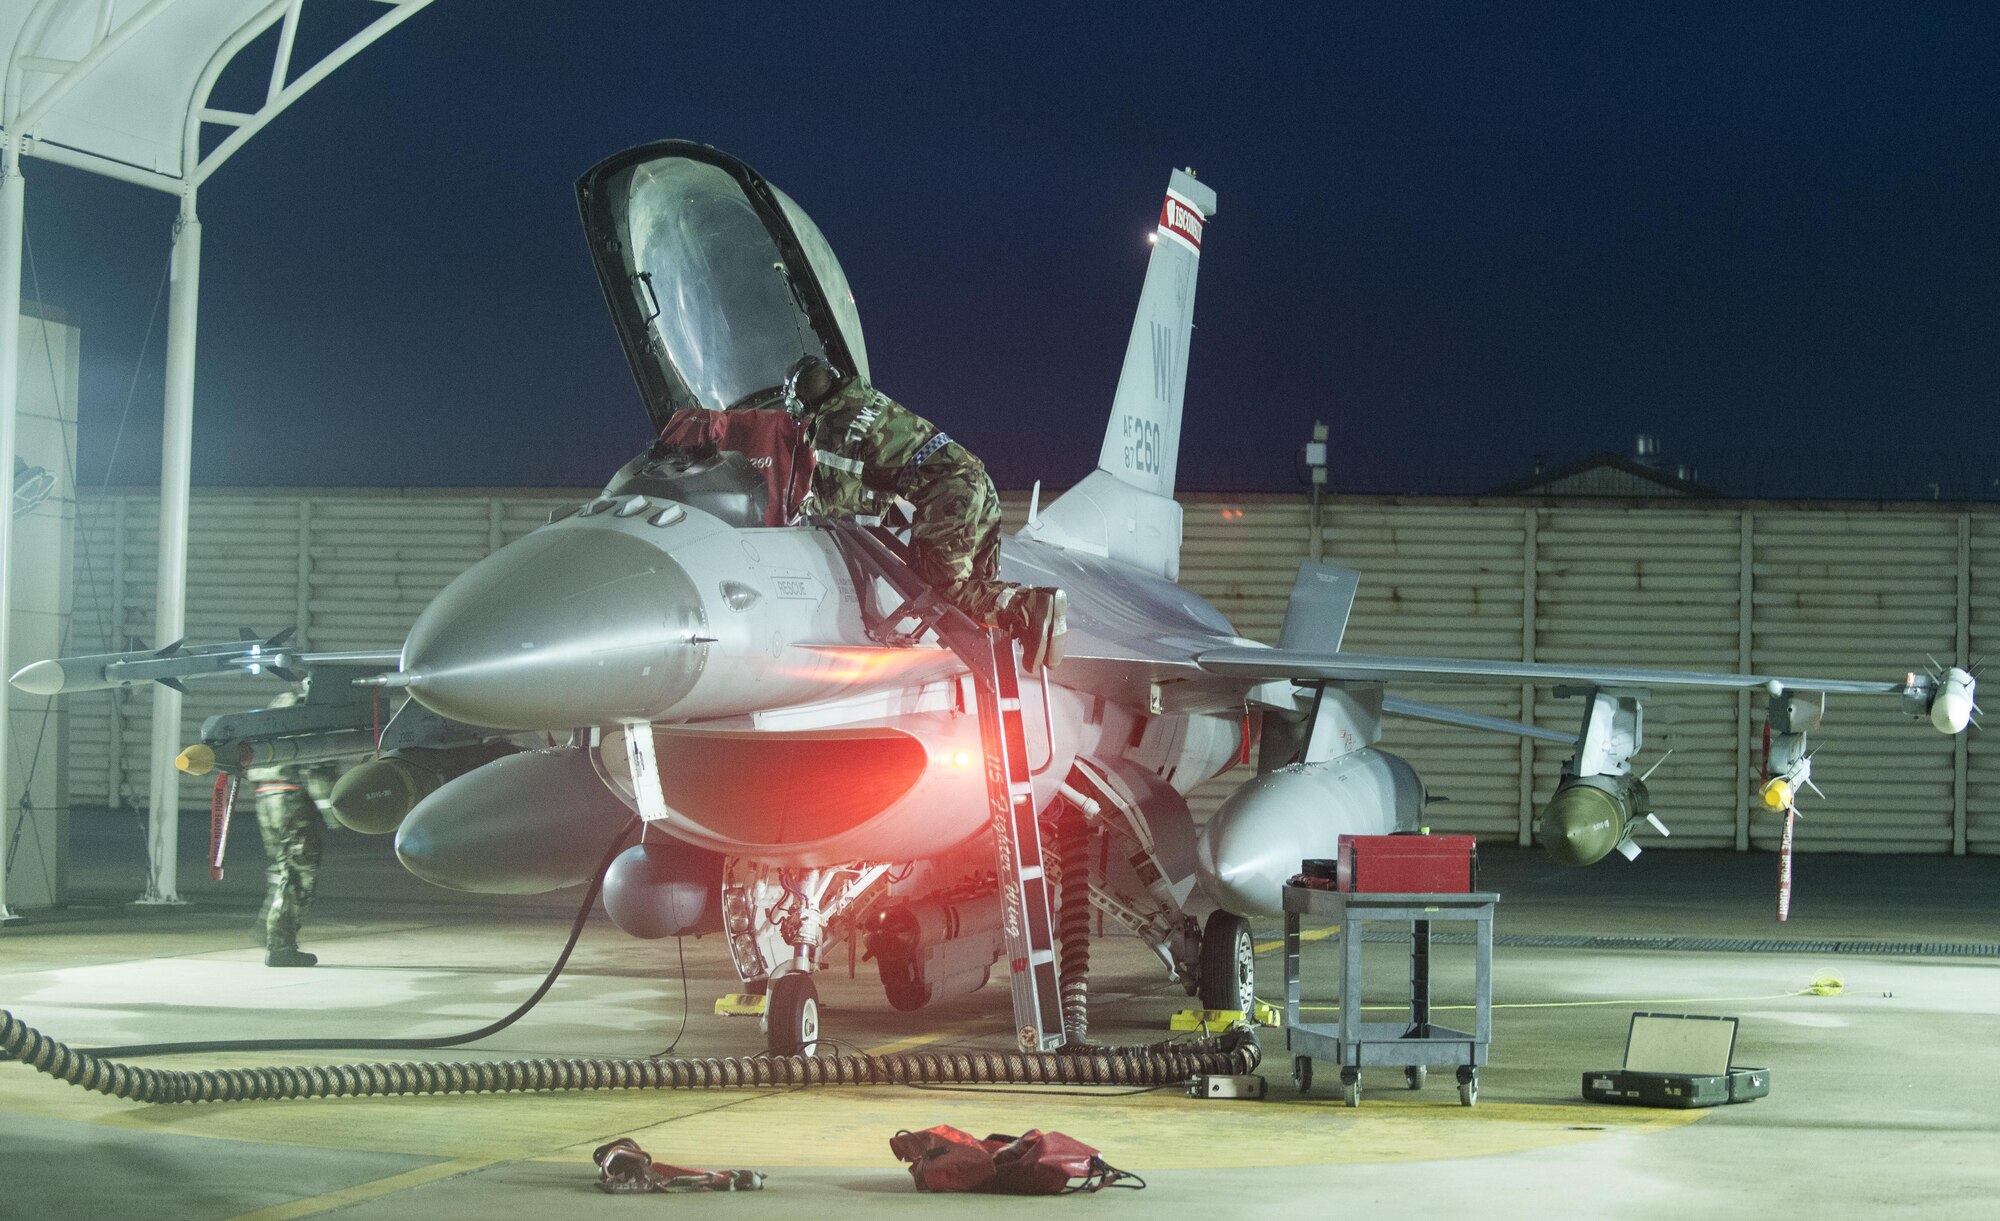 A U.S. Air Force crew chief, assigned to the 115th Fighter Wing, Wisconsin Air National Guard, performs maintenance on an F-16 Fighting Falcon at Kunsan Air Base, Republic of Korea, Aug. 22, 2017. The 115th Fighter Wing participated in a regularly-scheduled operational readiness exercise, Beverly Pack 17-3, as part of a Theater Security Package deployment to Kunsan. Pacific Air Forces TSPs signify a continued commitment to regional stability and security, while allowing units to train in the Pacific theater. (U.S. Air Force photo by 2nd Lt. Brittany Curry/Released)